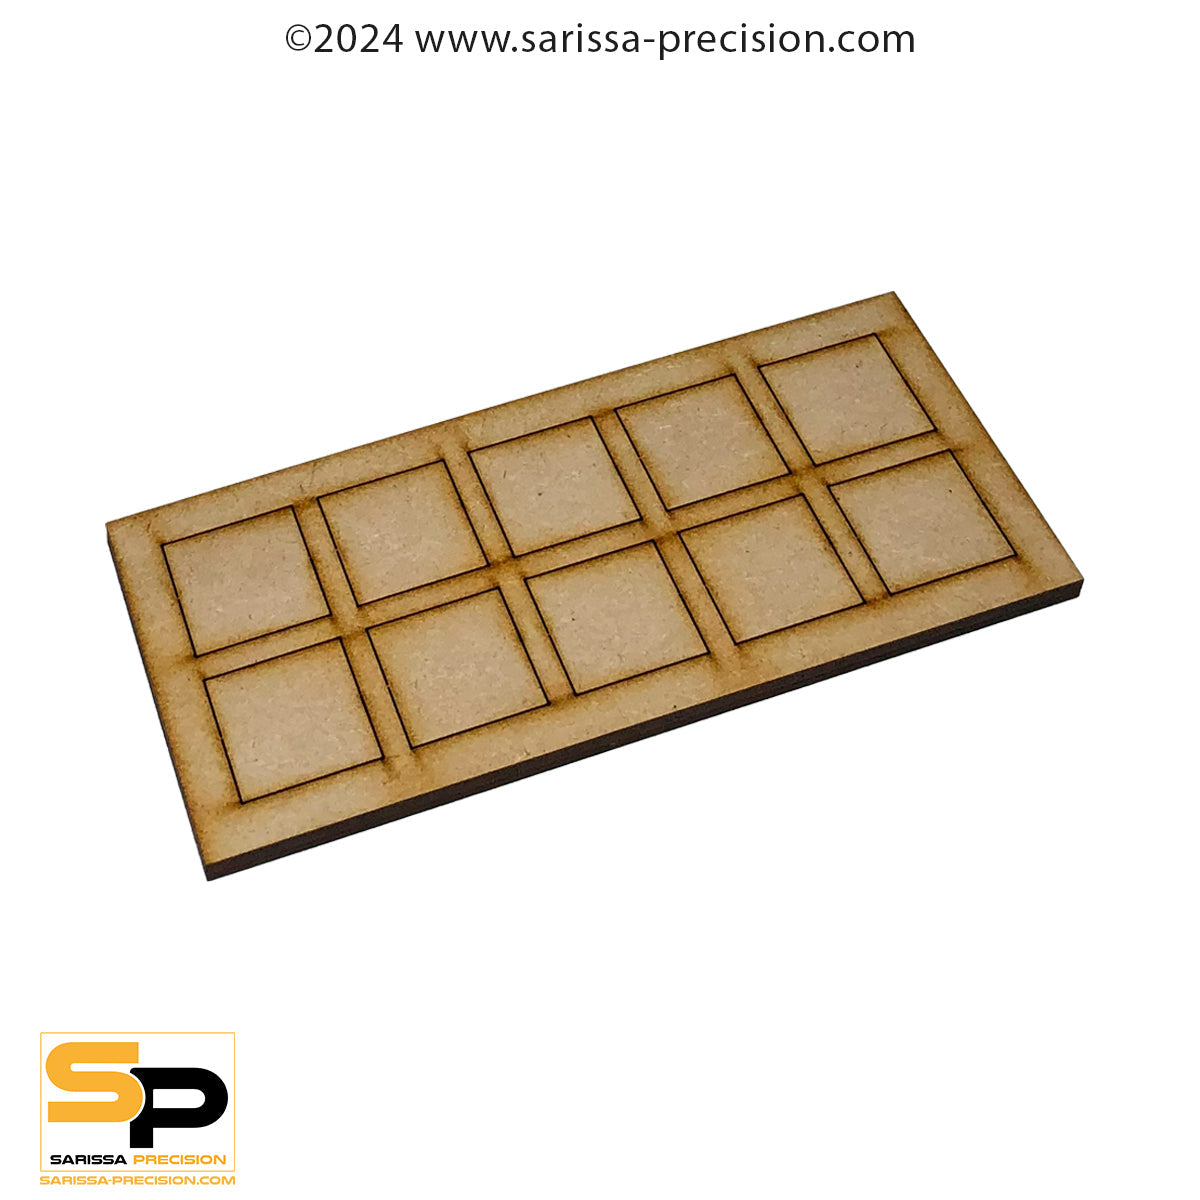 15x12 30x30mm Conversion Tray for 25x25mm bases